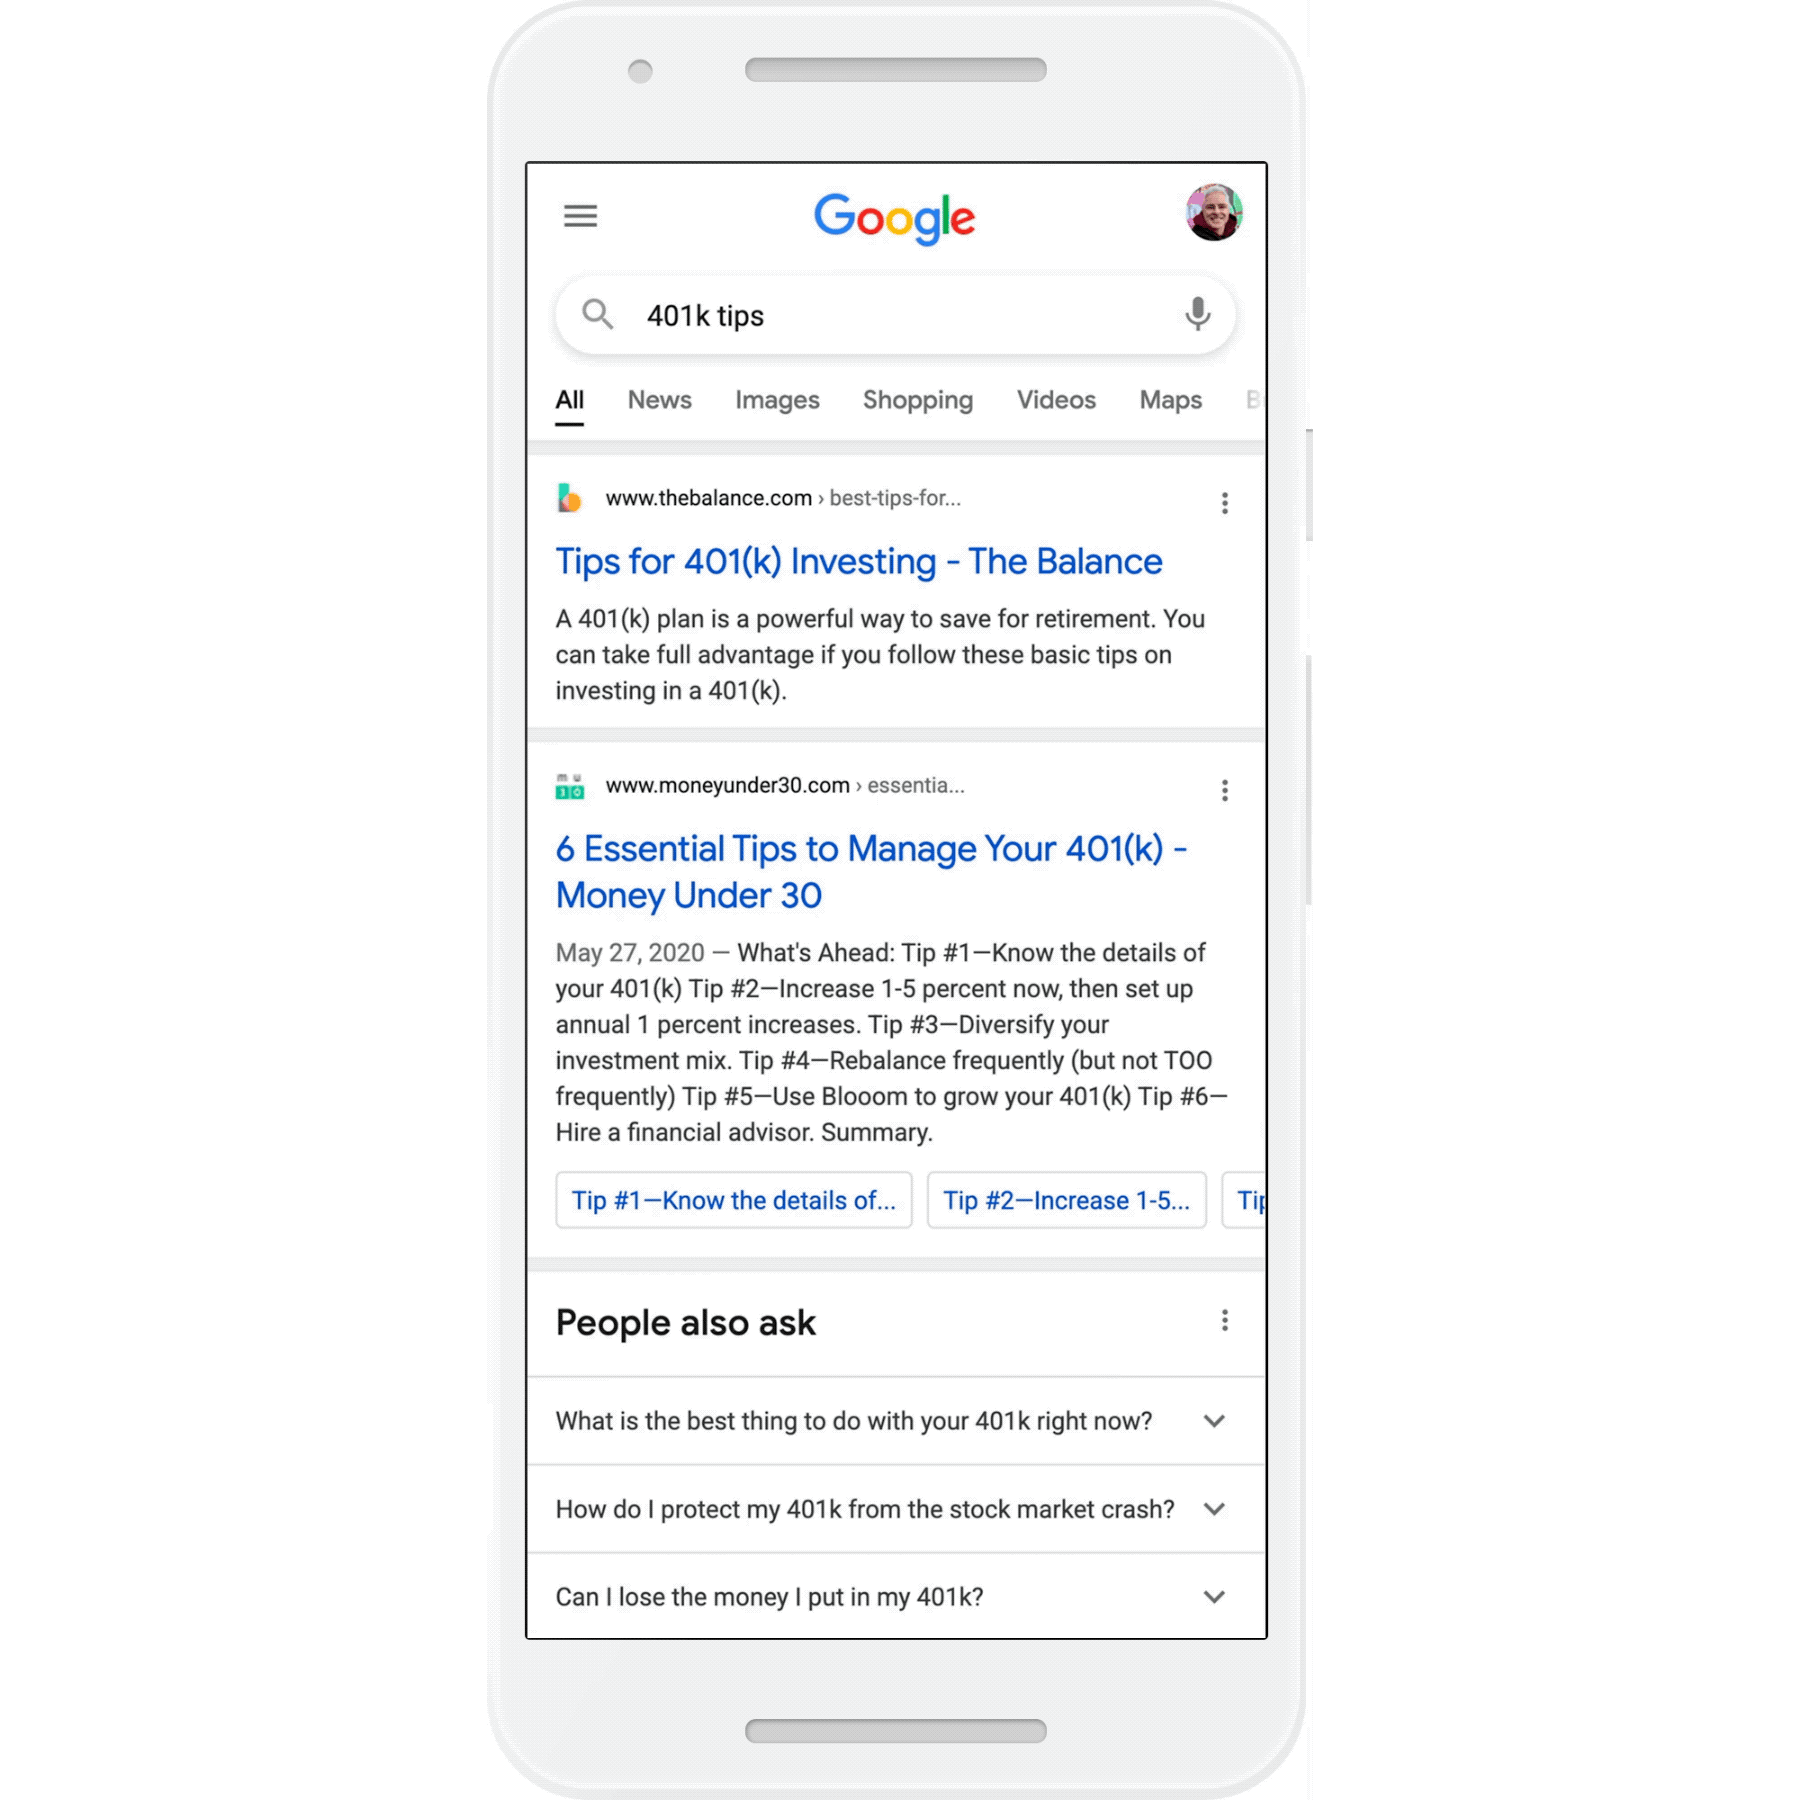 Google Search Adds New Info-Cards for Verifying Search Results